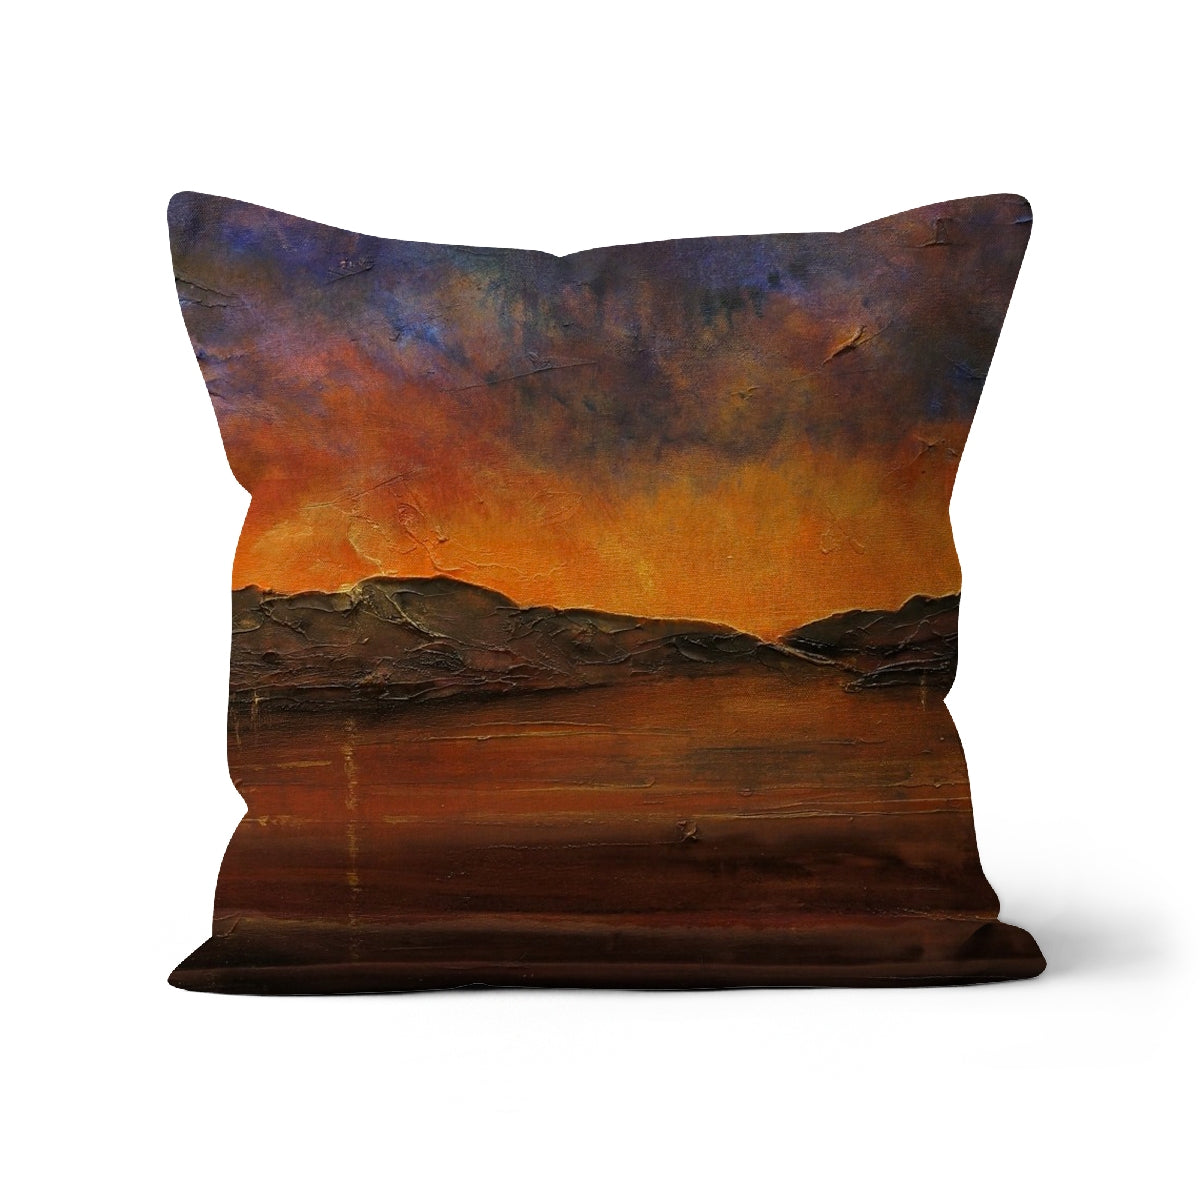 A Brooding Clyde Dusk Art Gifts Cushion-Cushions-River Clyde Art Gallery-Canvas-24"x24"-Paintings, Prints, Homeware, Art Gifts From Scotland By Scottish Artist Kevin Hunter